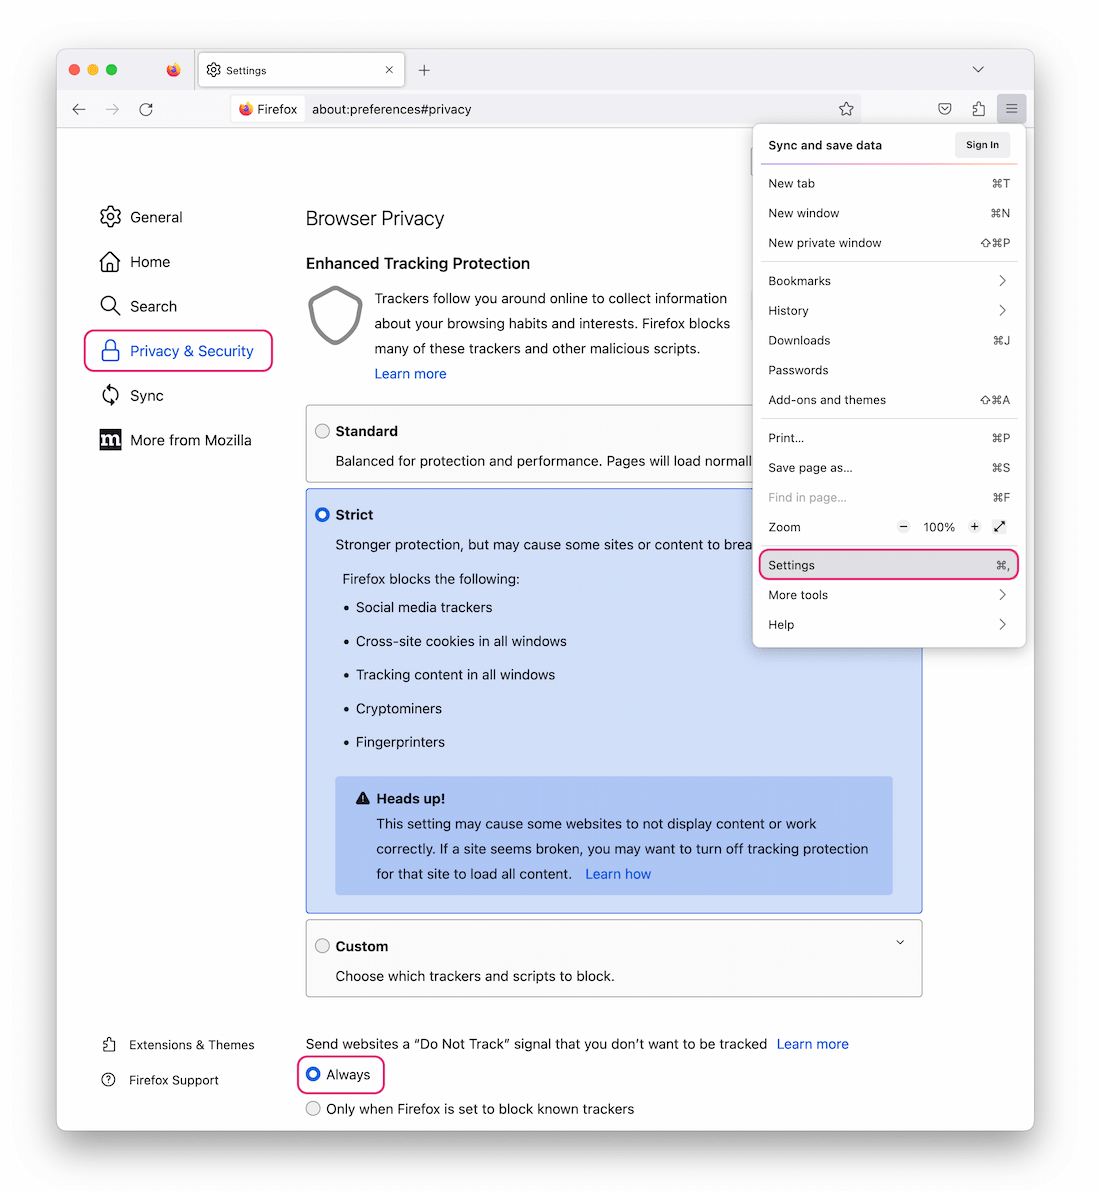 Firefox privacy and security settings.